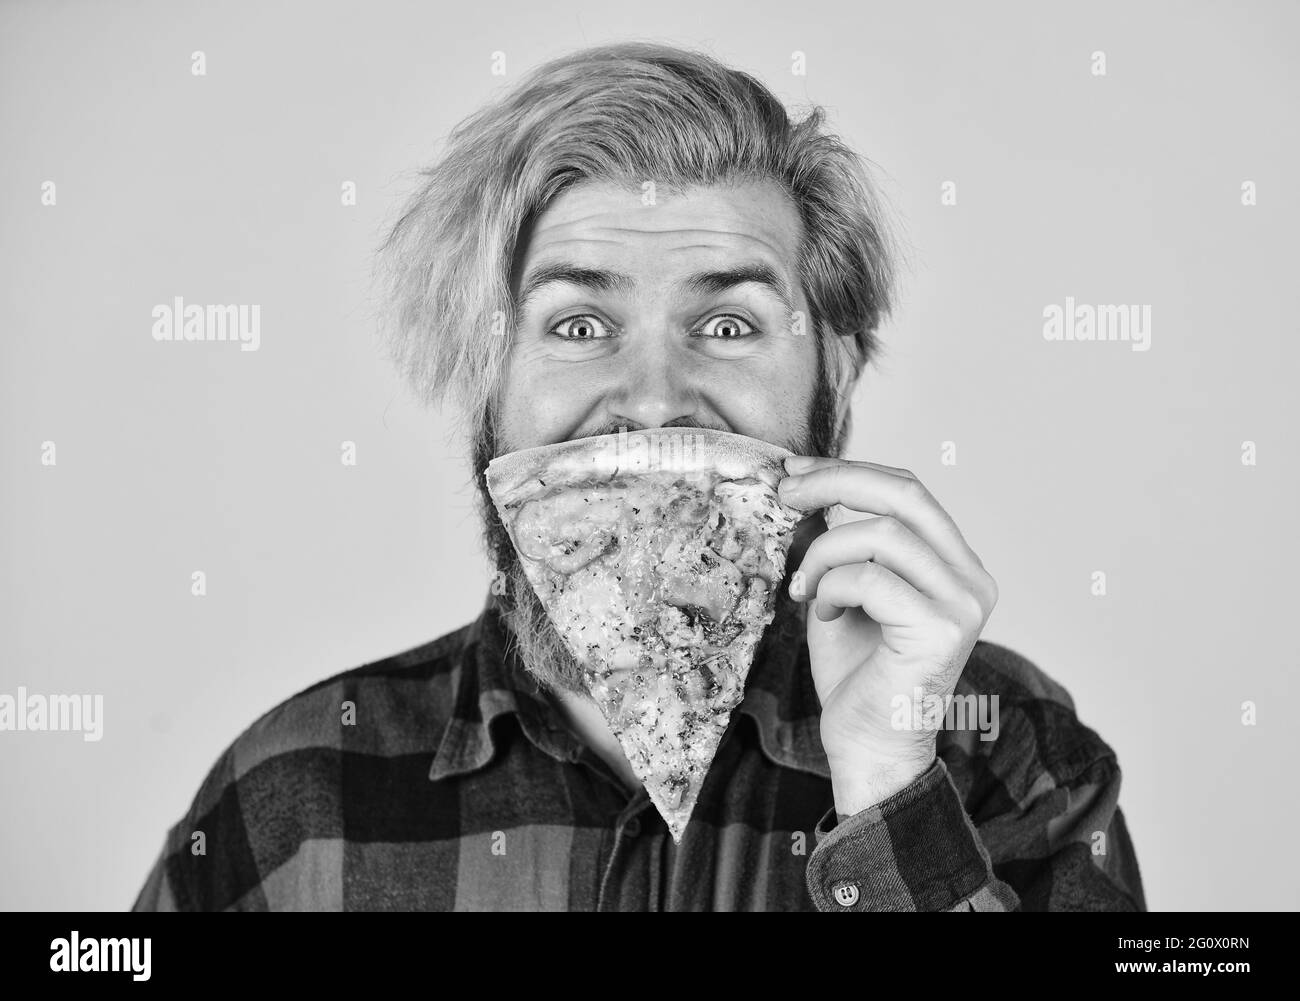 Play with food. Good to last slice. Hungry man going to eat pizza alone. Cheesy taste. In mood for Italian food. Man bearded hipster hold pizza. Pizza Stock Photo